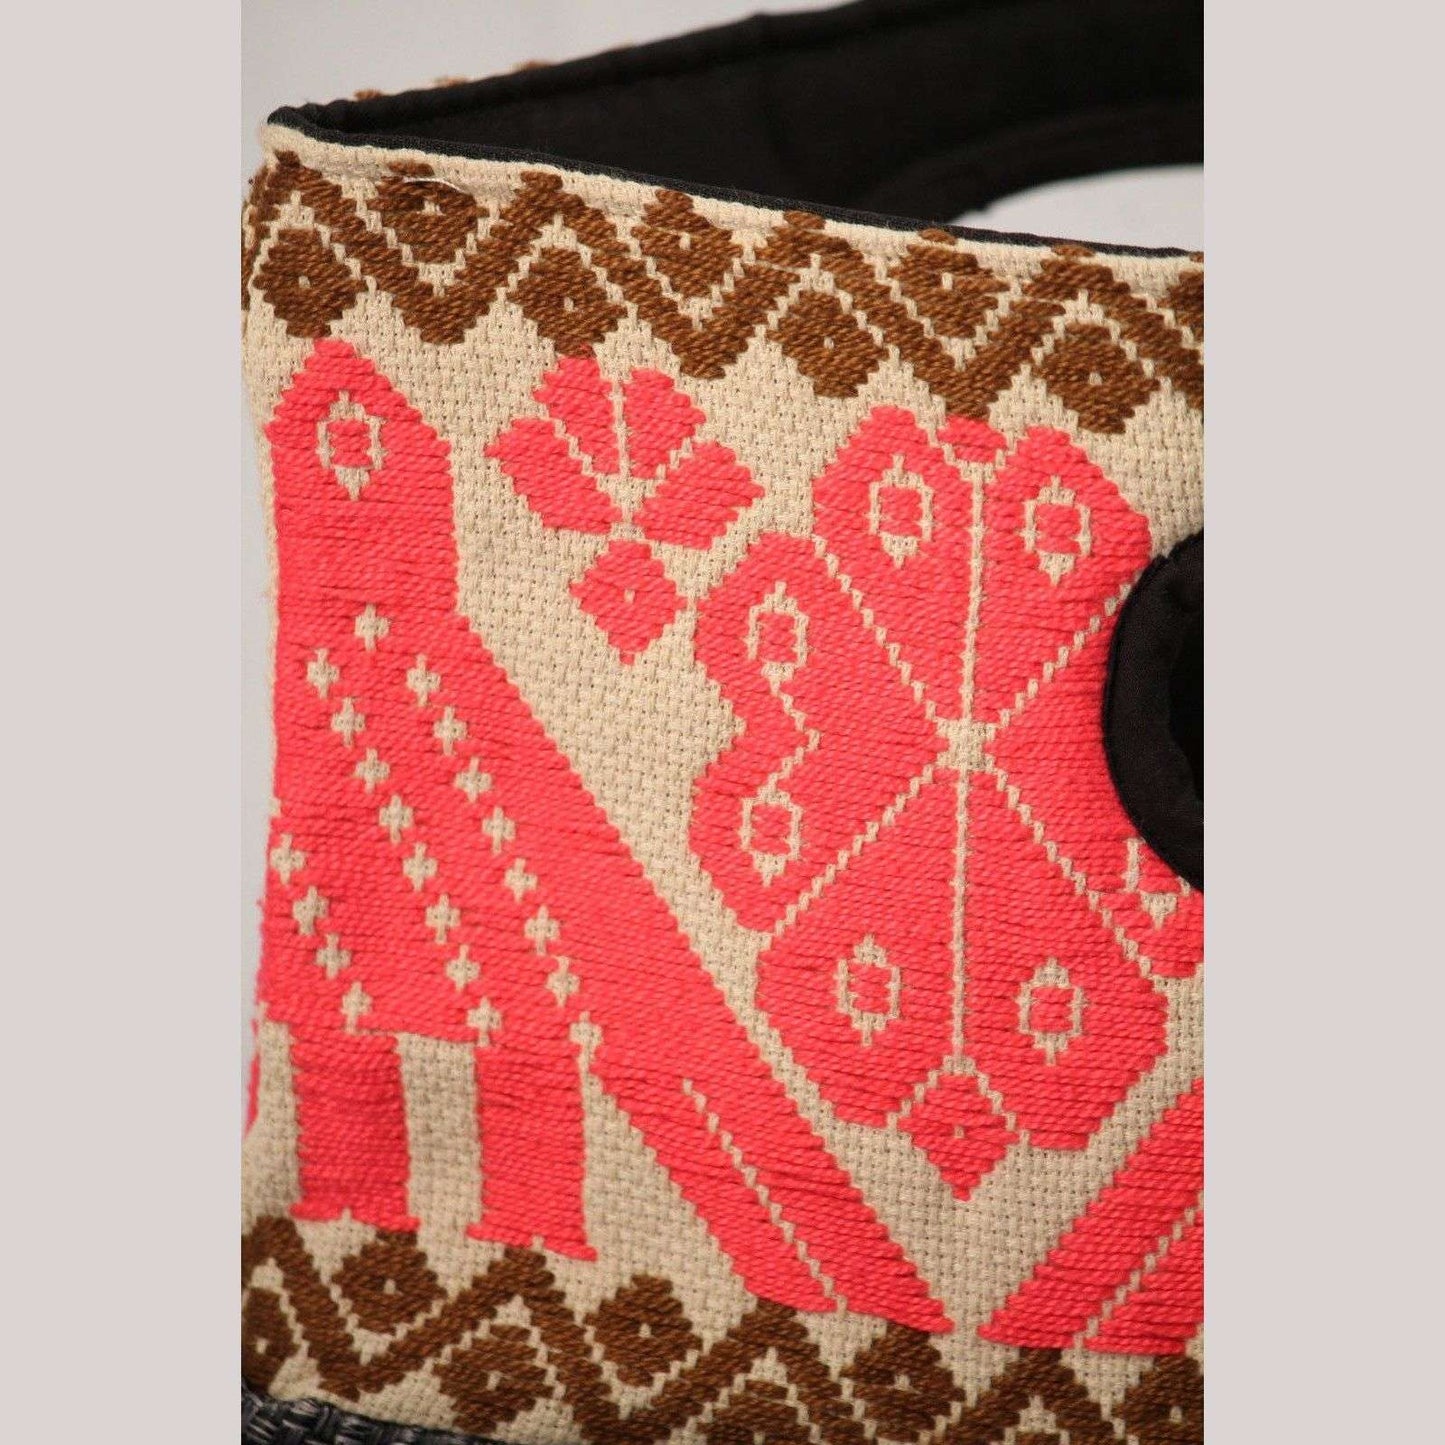 Mexican Purse/Bag/Tote Hand Embroidered Folk Art Mexico Textile Collectible Pink